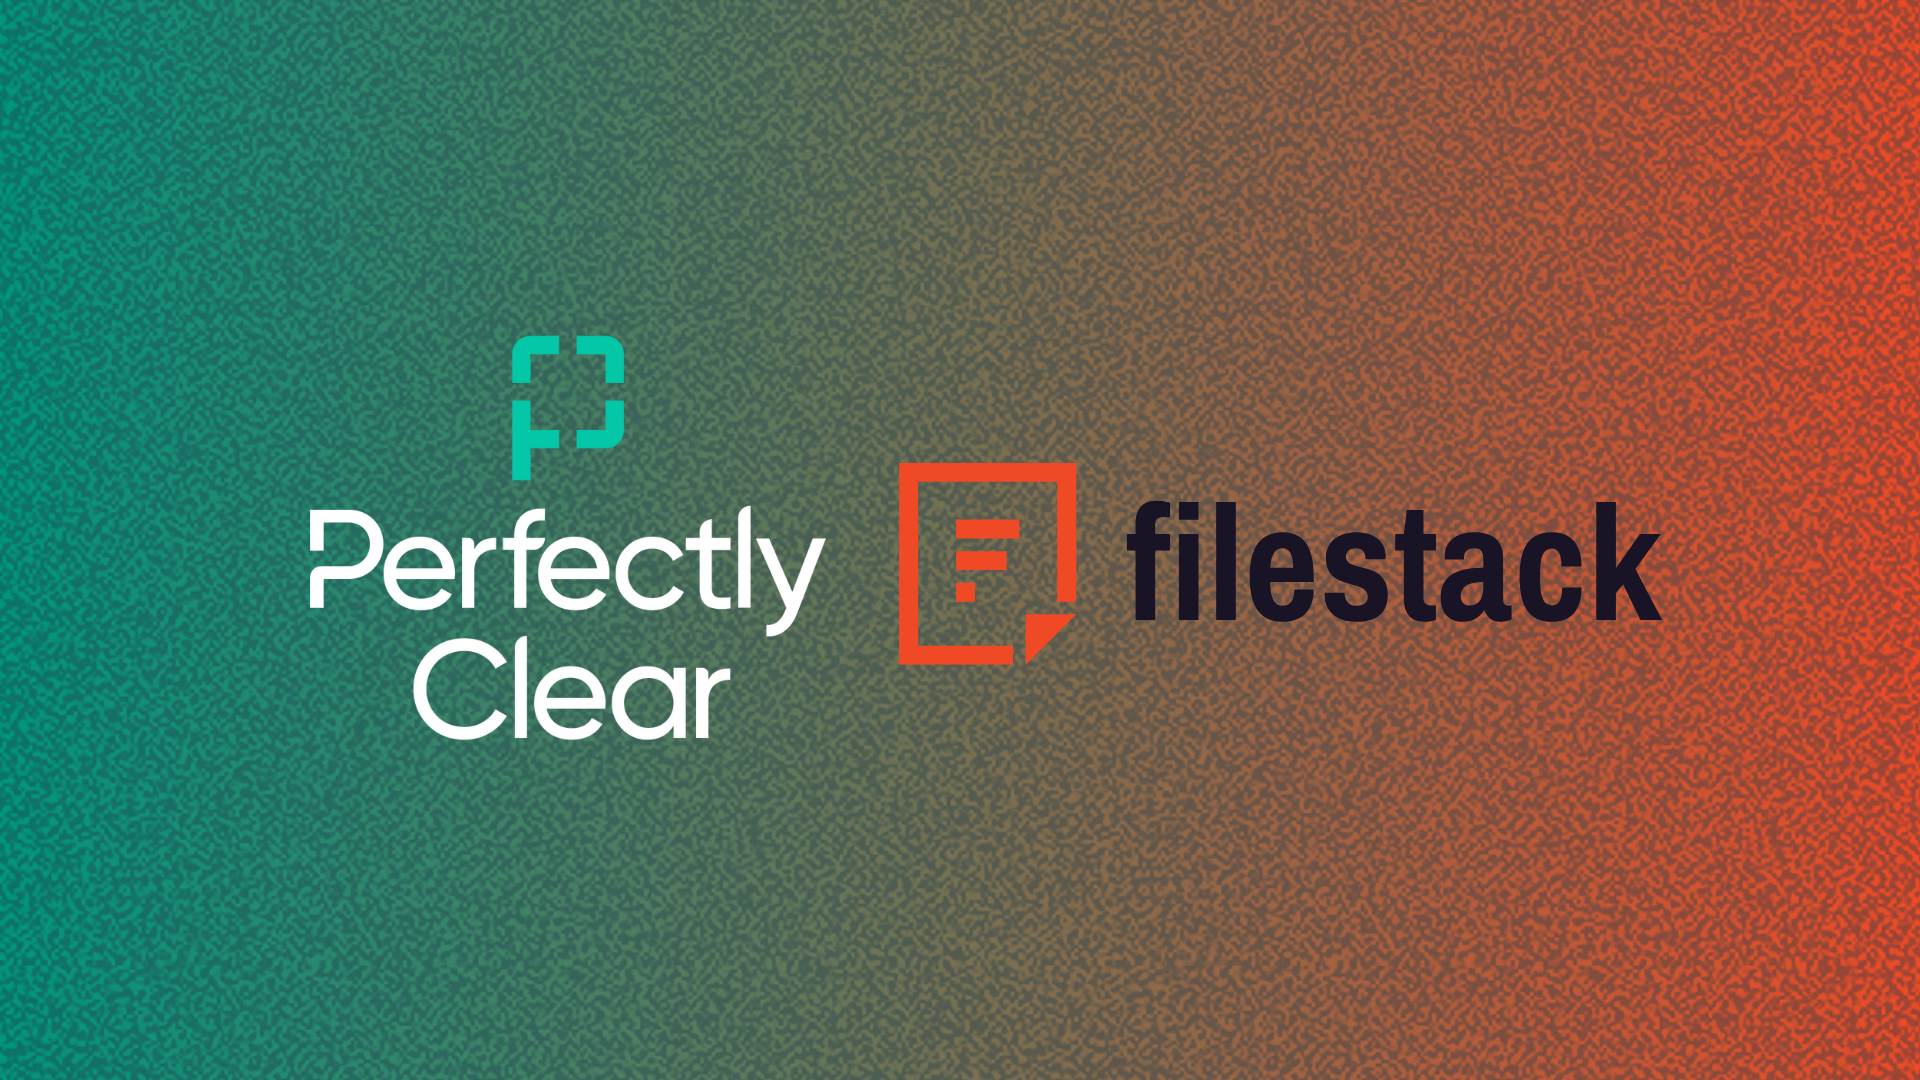 Perfectly Clear & Filestack